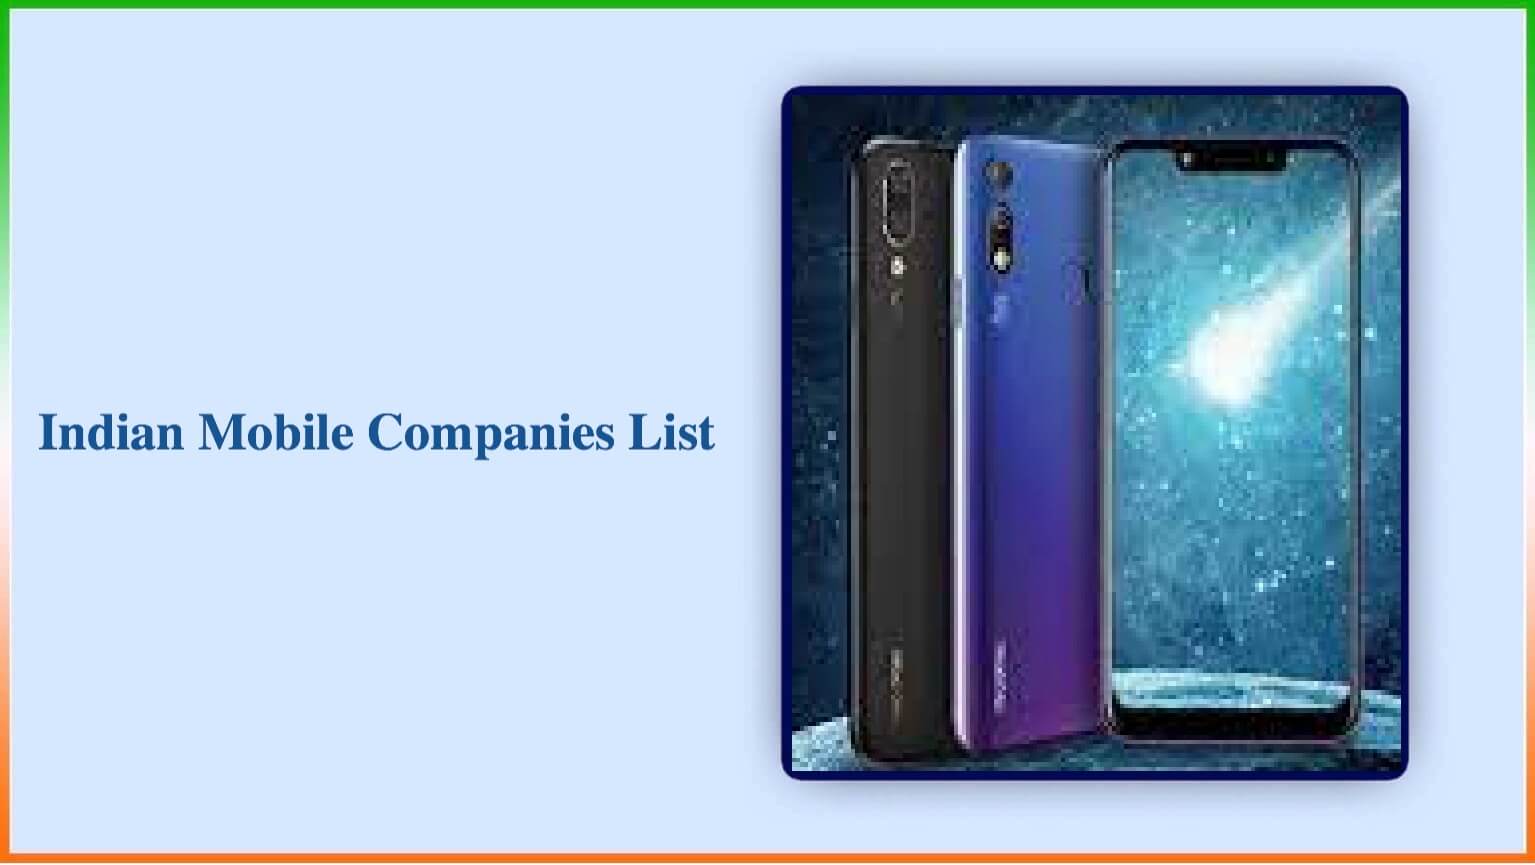 Indian Mobile Companies List